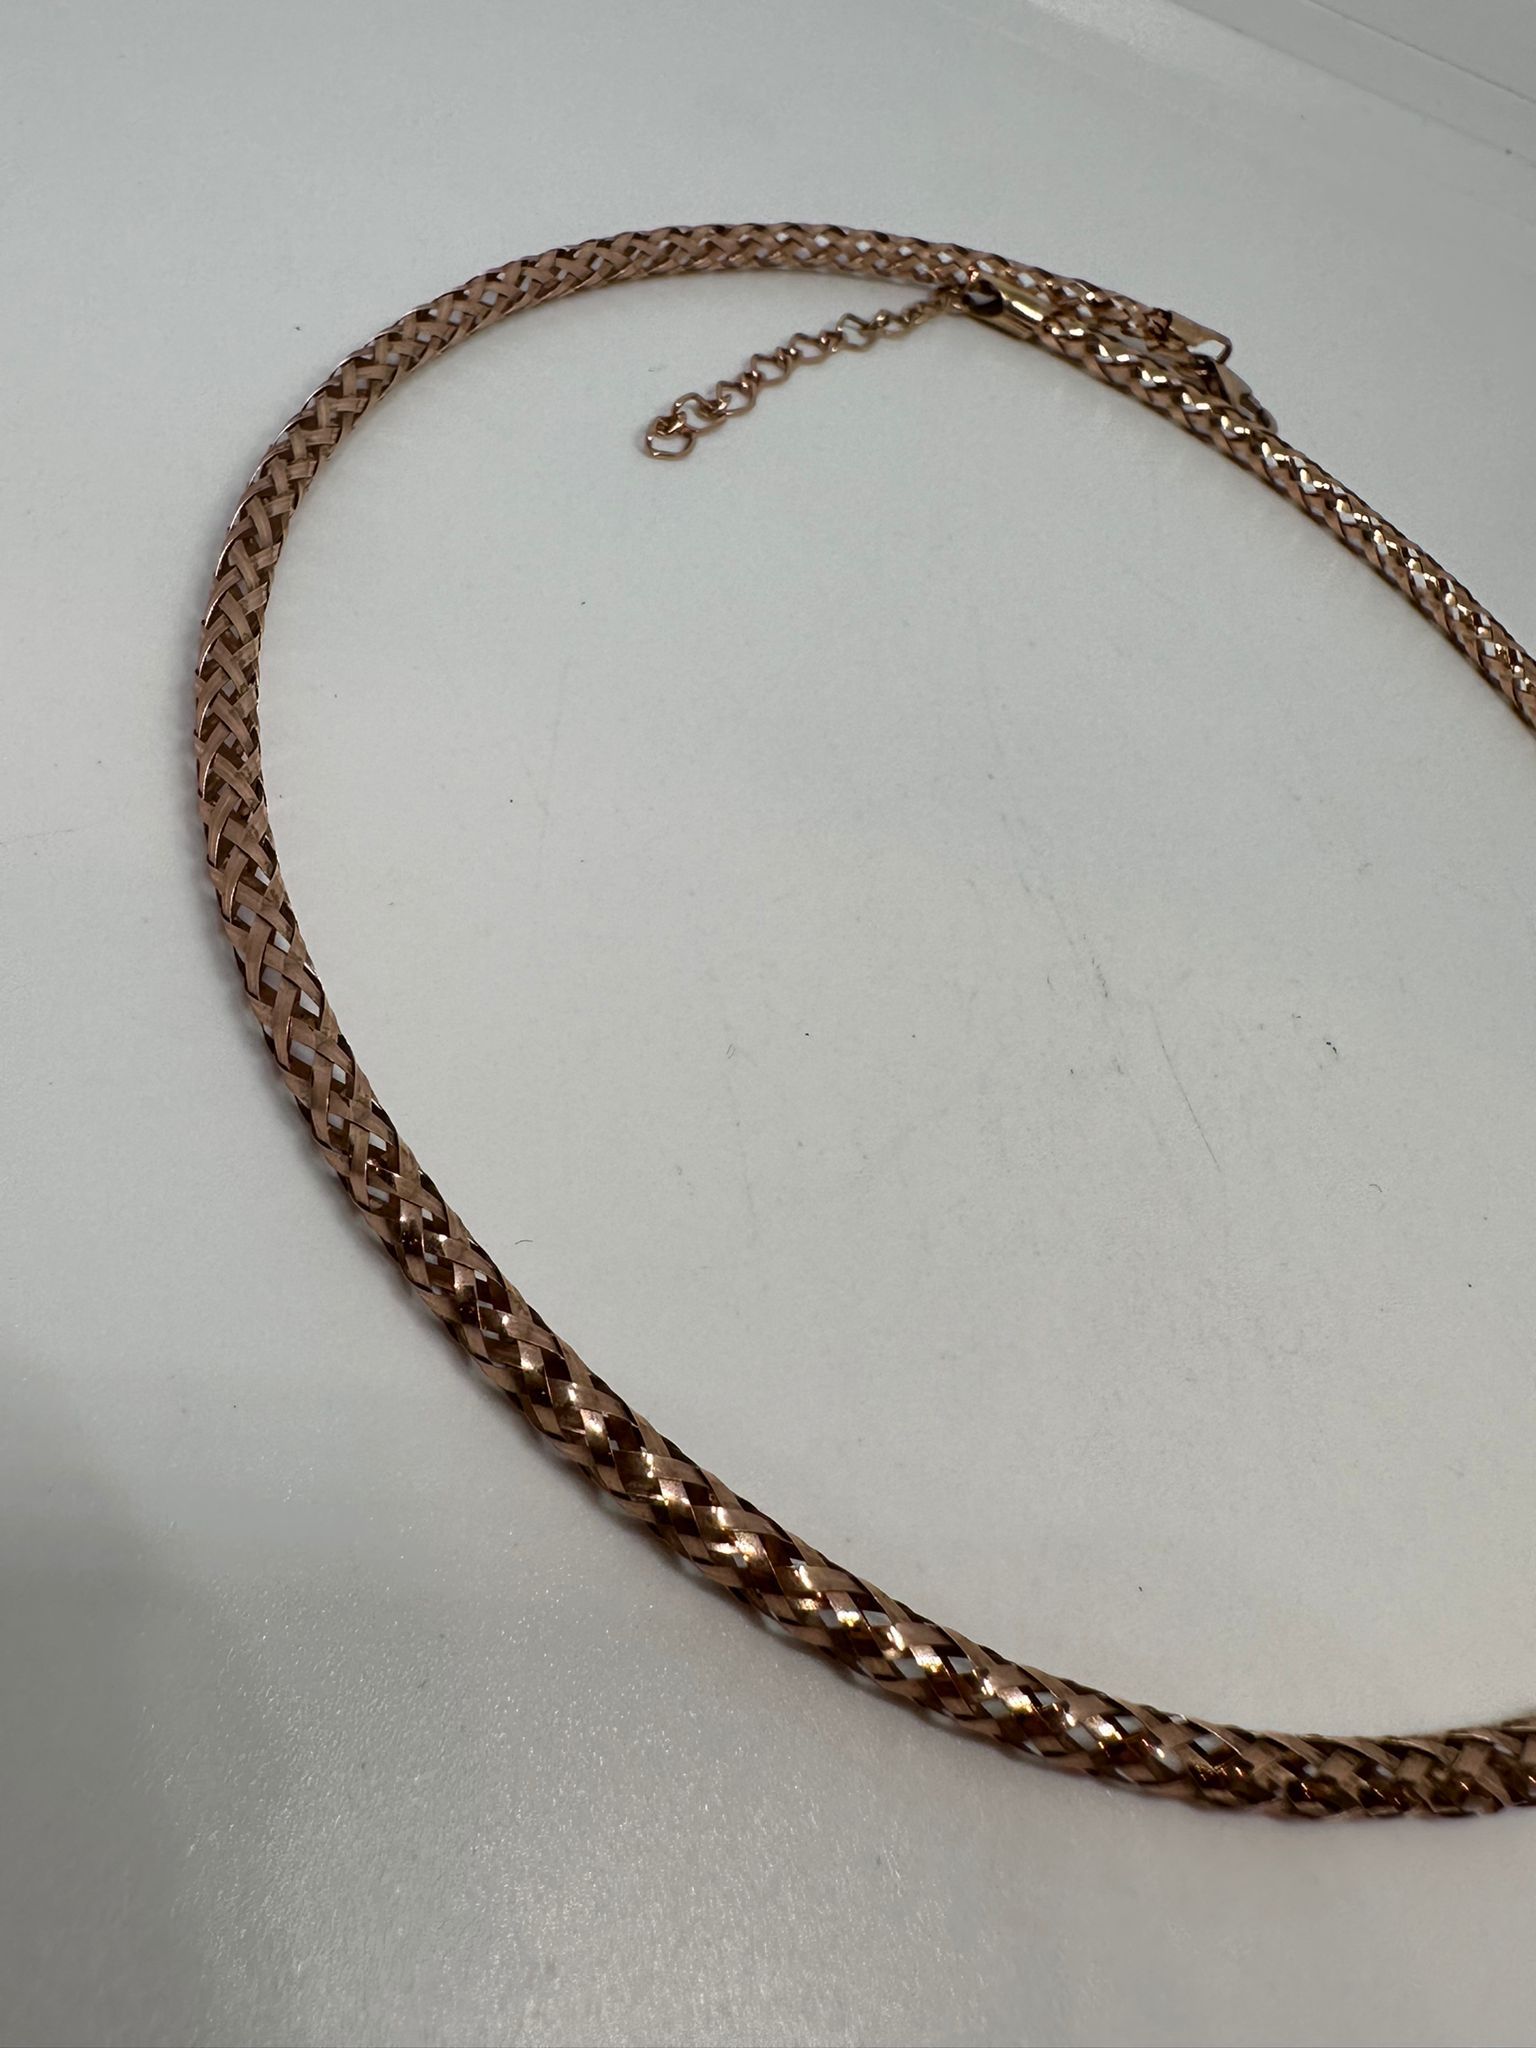 9ct rose gold adjustable chain - Image 2 of 2